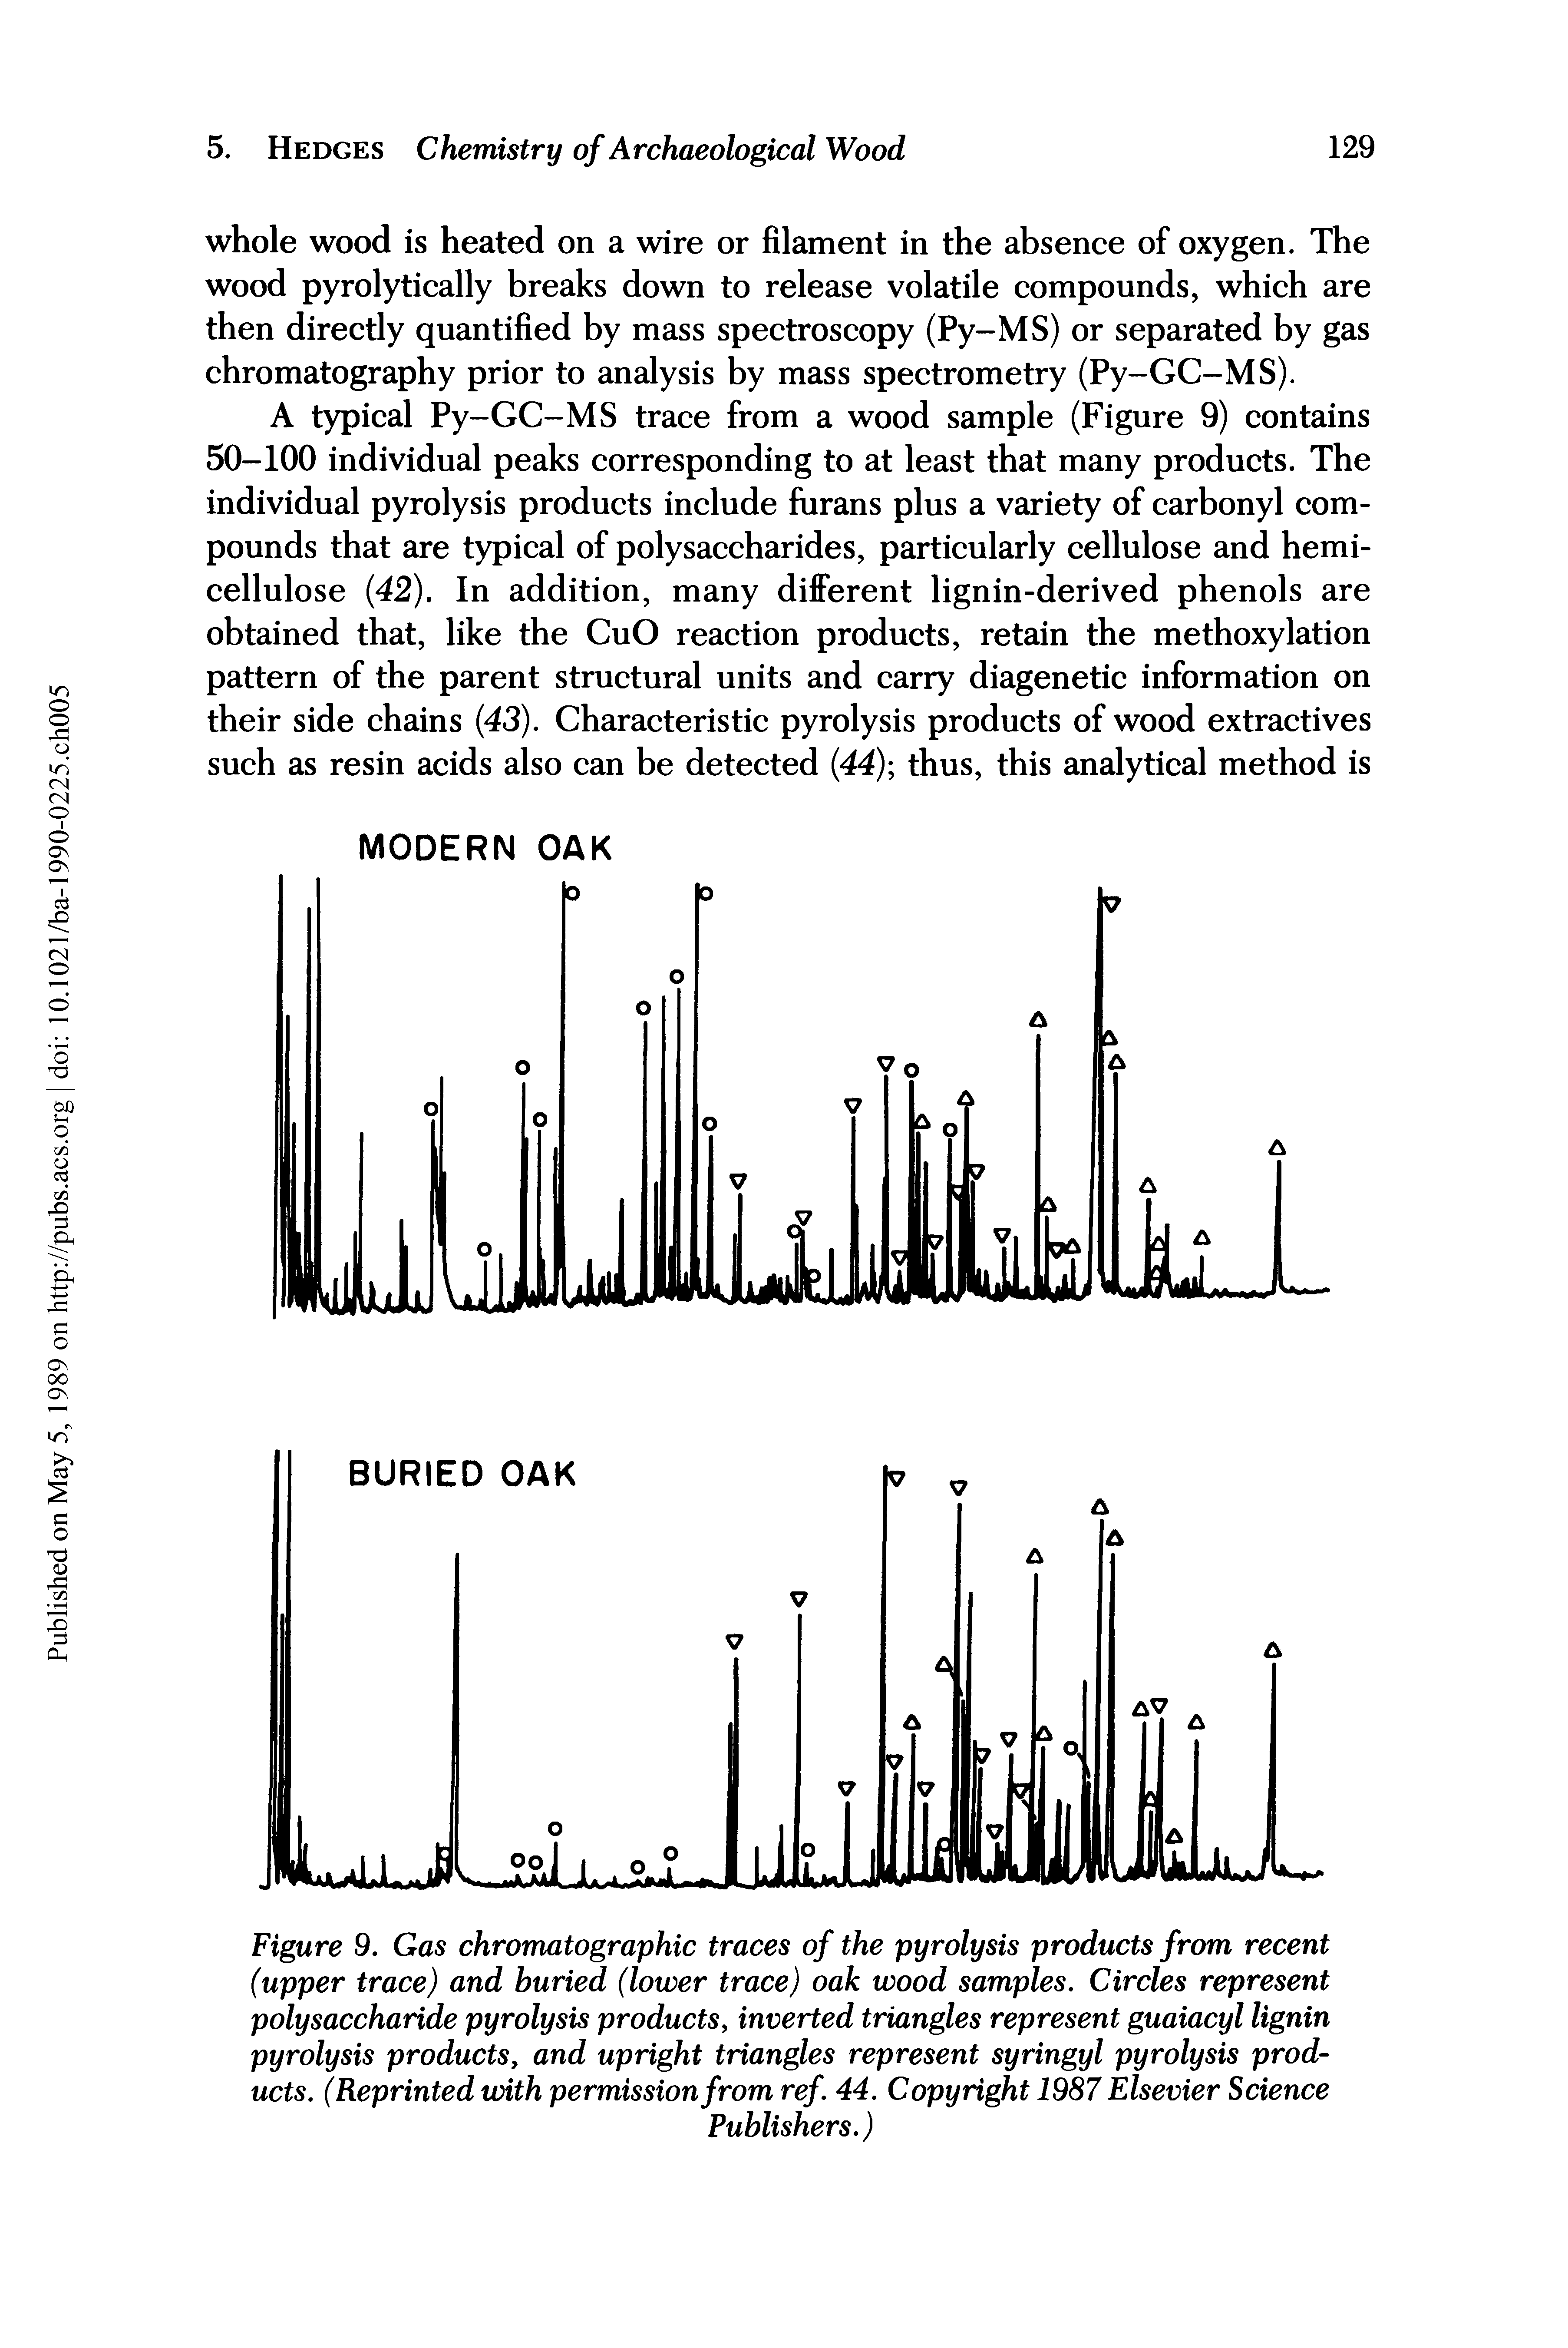 Figure 9. Gas chromatographic traces of the pyrolysis products from recent (upper trace) and buried (lower trace) oak wood samples. Circles represent polysaccharide pyrolysis products, inverted triangles represent guaiacyl lignin pyrolysis products, and upright triangles represent syringyl pyrolysis products. (Reprinted with permission from ref. 44. Copyright 1987 Elsevier Science...